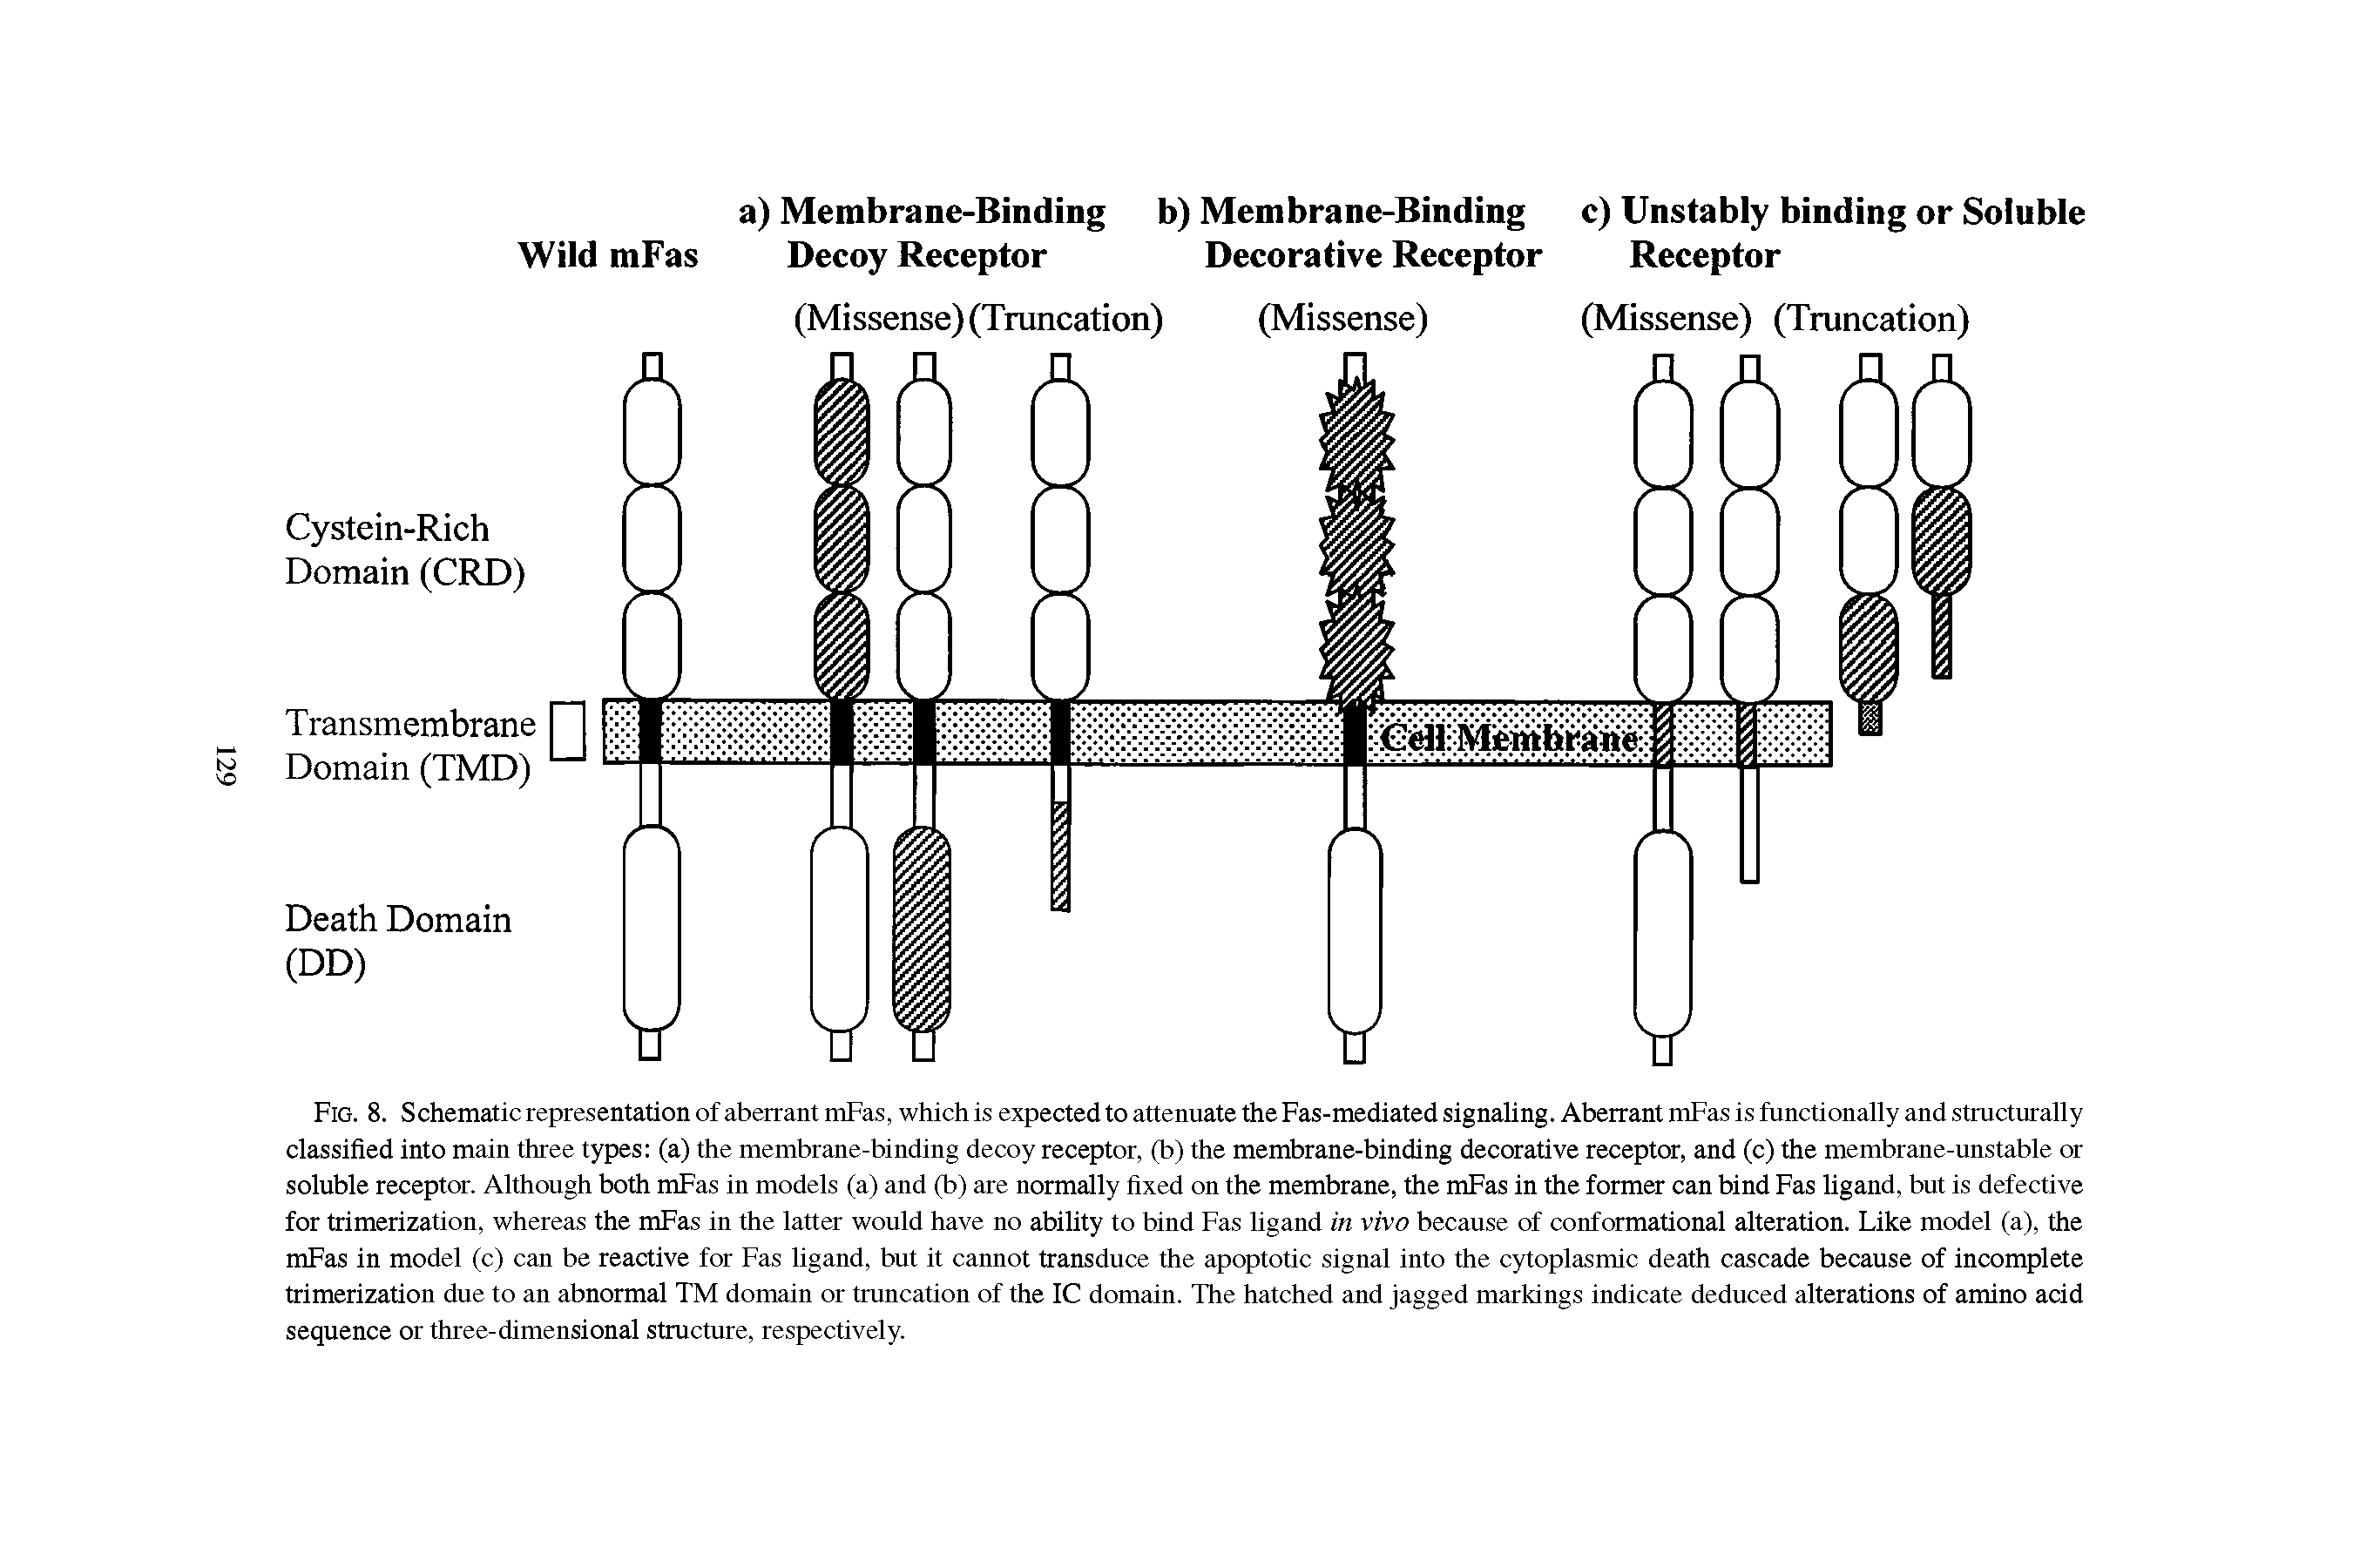 Fig. 8. Schematic representation of aberrant mFas, which is expected to attenuate the Fas-mediated signaling. Aberrant mFas is functionally and structurally classified into main three types (a) the membrane-binding decoy receptor, (b) the membrane-binding decorative receptor, and (c) the membrane-unstable or soluble receptor. Although both mFas in models (a) and (b) are normally fixed on the membrane, the mFas in the former can bind Fas ligand, but is defective for trimerization, whereas the mFas in the latter would have no ability to bind Fas ligand in vivo because of conformational alteration. Like model (a), the mFas in model (c) can be reactive for Fas ligand, but it cannot transduce the apoptotic signal into the cytoplasmic death cascade because of incomplete trimerization due to an abnormal TM domain or truncation of the 1C domain. The hatched and jagged markings indicate deduced alterations of amino acid sequence or three-dimensional structure, respectively.